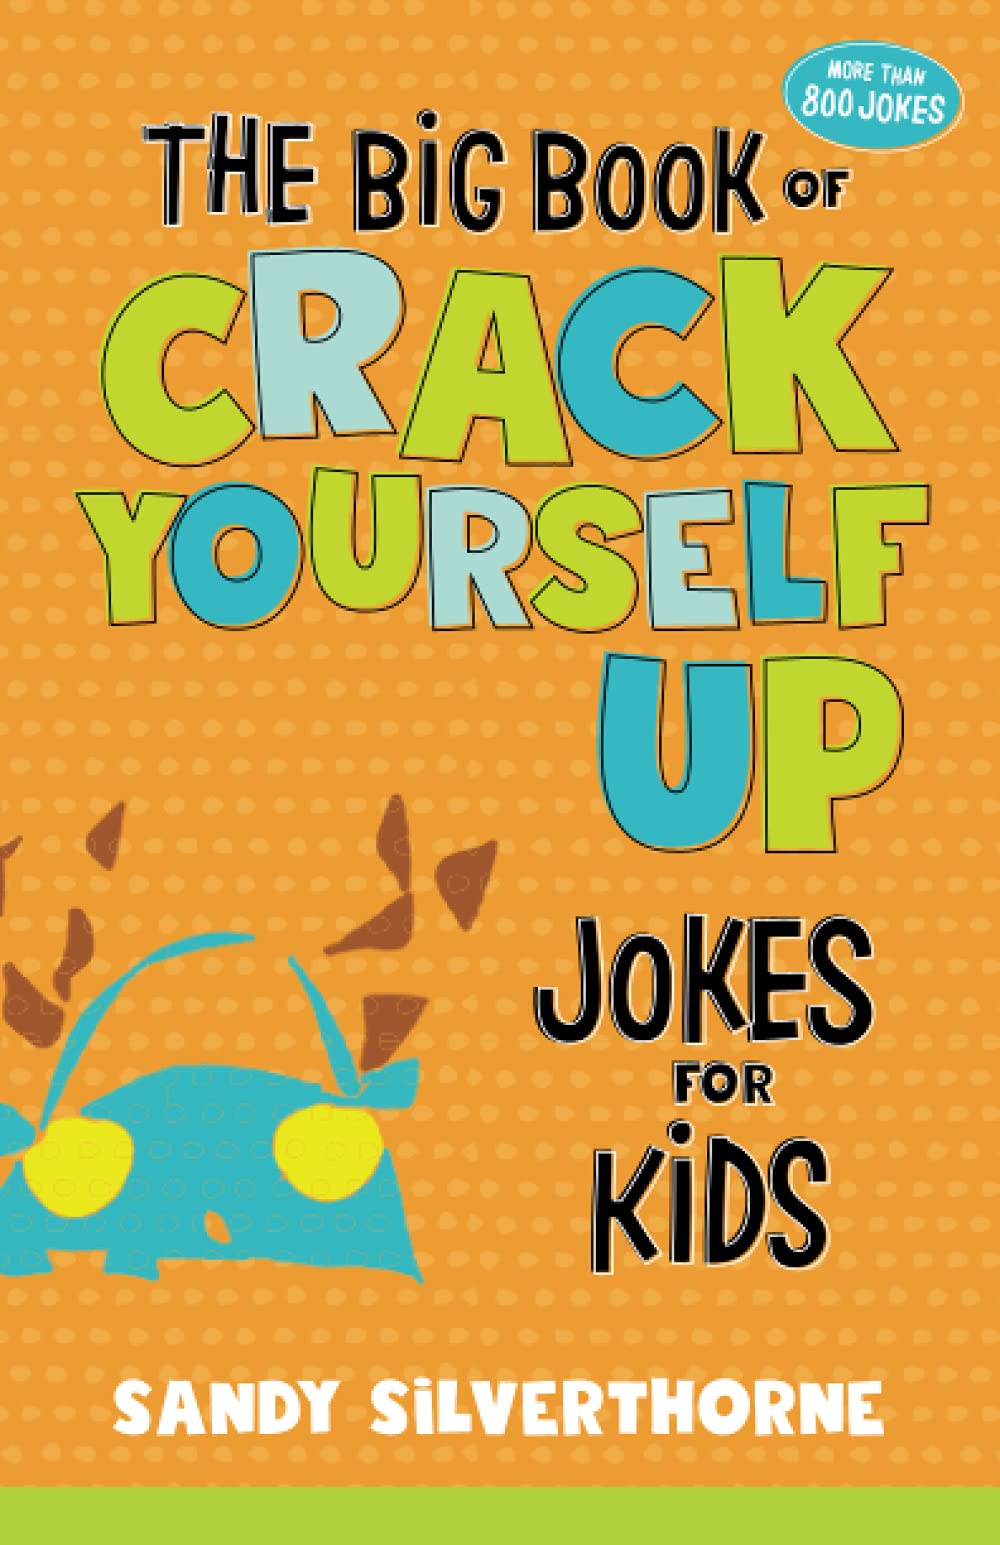 Big Book of Crack Yourself Up Jokes for Kids